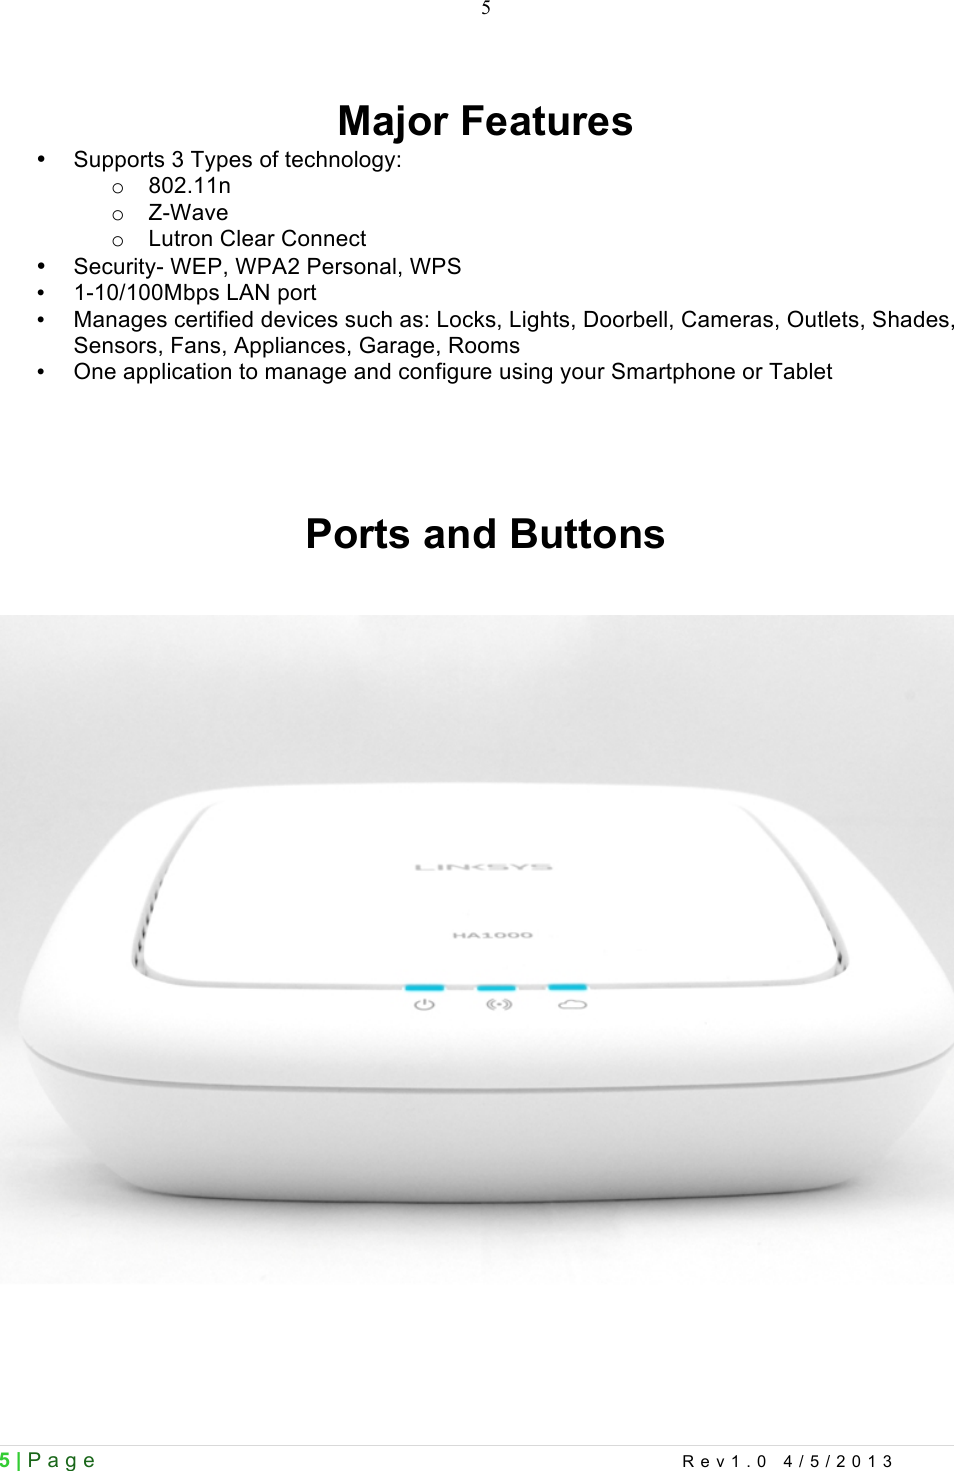  5 | Page    Rev1.0 4/5/2013  5  Major Features • Supports 3 Types of technology: o 802.11n o  Z-Wave o Lutron Clear Connect • Security- WEP, WPA2 Personal, WPS • 1-10/100Mbps LAN port • Manages certified devices such as: Locks, Lights, Doorbell, Cameras, Outlets, Shades, Sensors, Fans, Appliances, Garage, Rooms • One application to manage and configure using your Smartphone or Tablet      Ports and Buttons      